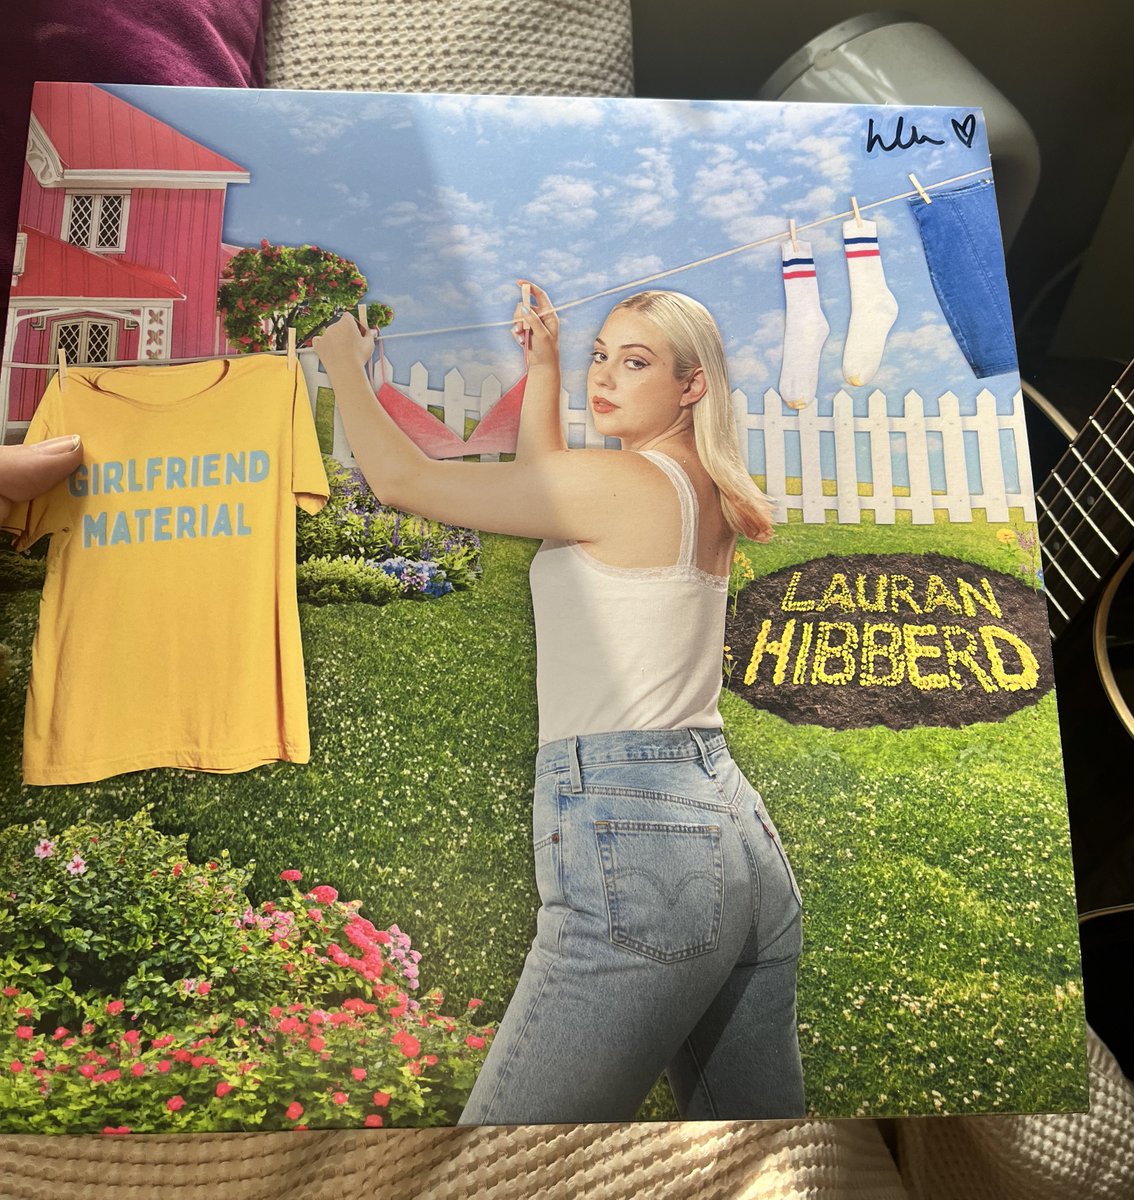 i may be a little late to the train but SHE’S HERE, SHE’S GORGEOUS, AND SHE’S SIGNED!!! i got the clear variant and it’s safe to say she’s one of my fav vinyl AND albums already lol